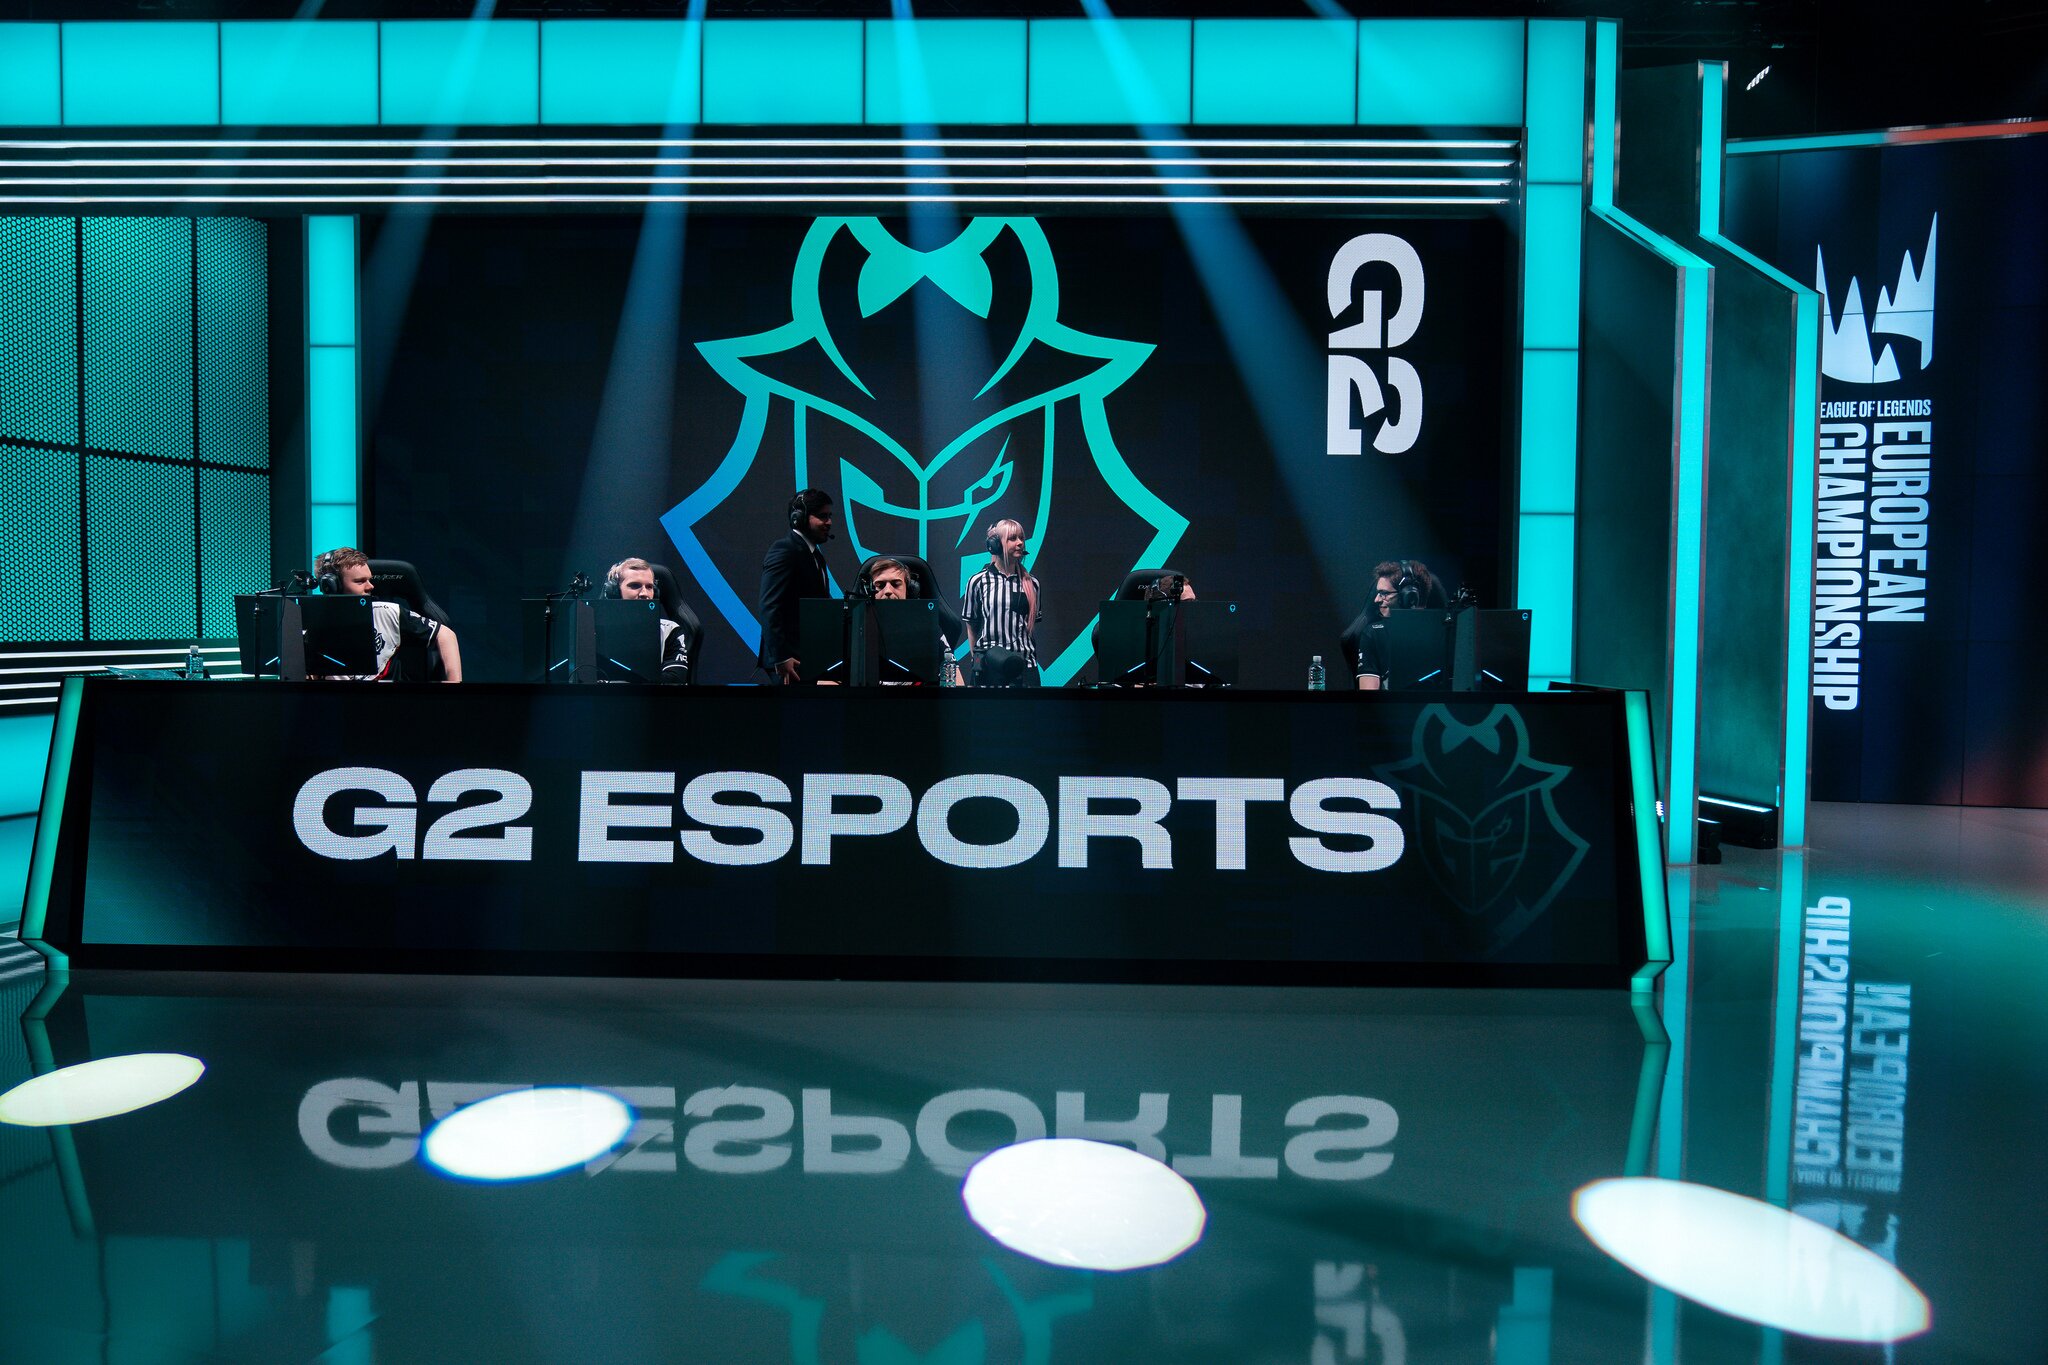 Week 4 of the 2019 LEC Spring Split is in the books, with G2 Esports still in sole possession of first place thanks to a dominant performance. (Photo courtesy of Riot Games)